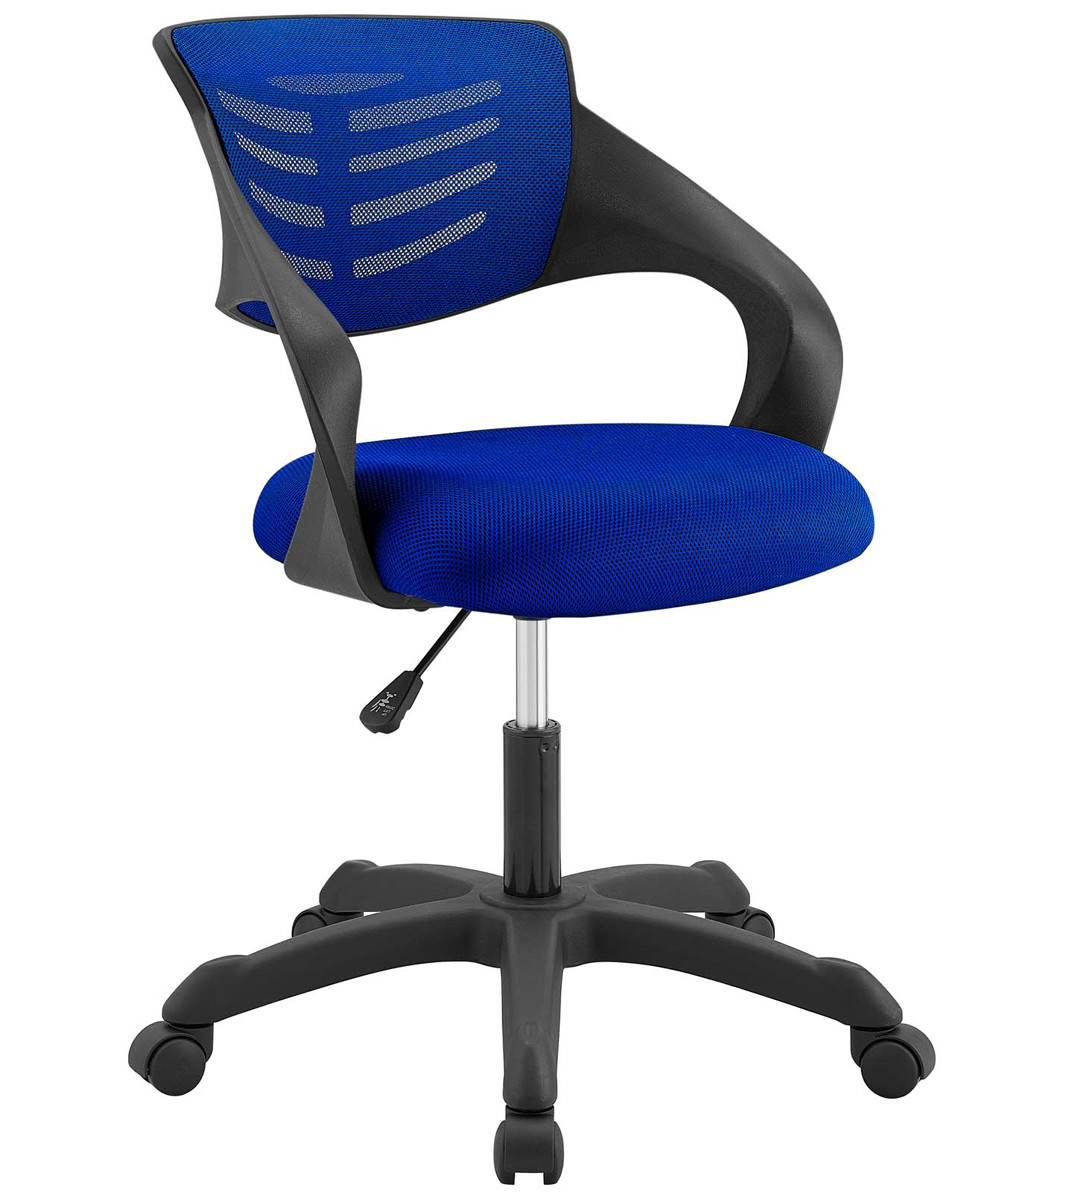 Thrive Small Swivel Desk Chair in Blue | Shop Healthy Posture Store